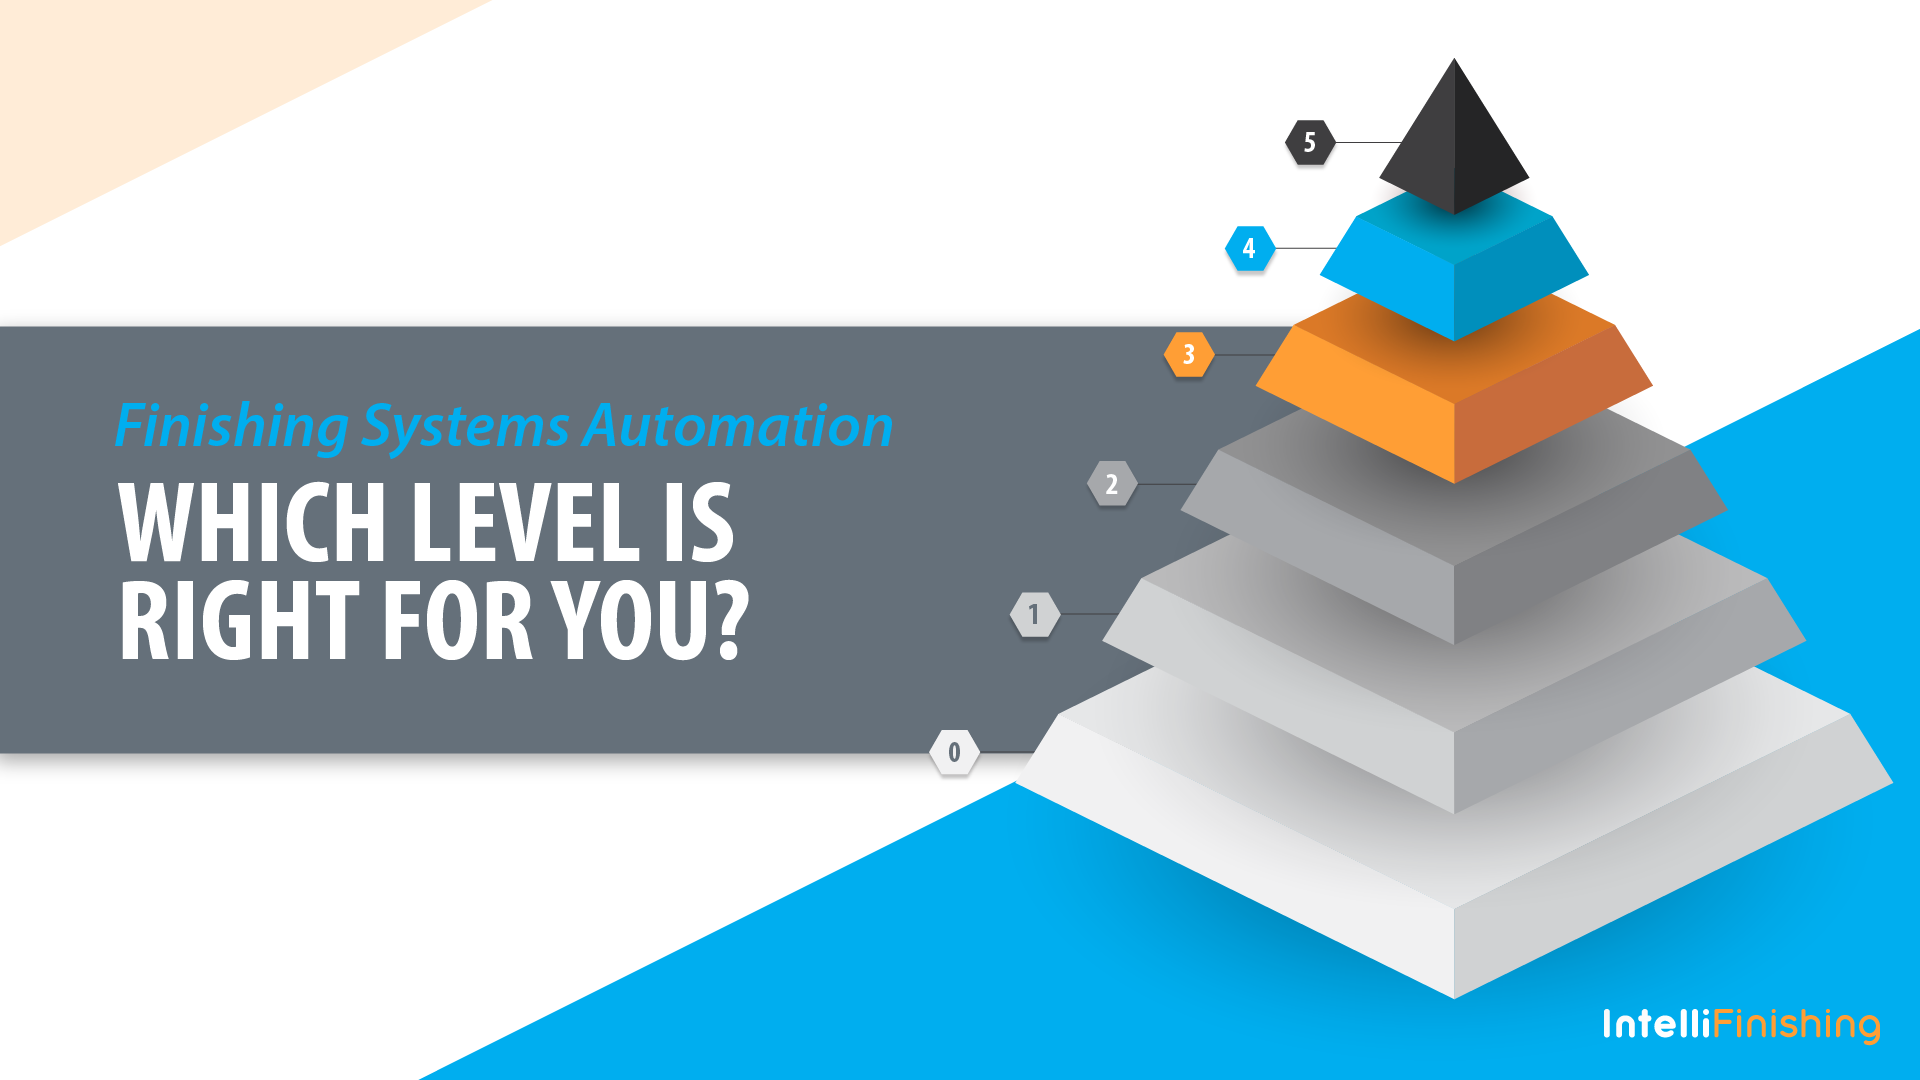 Finishing Systems Automation: Which Level Is Right for You?